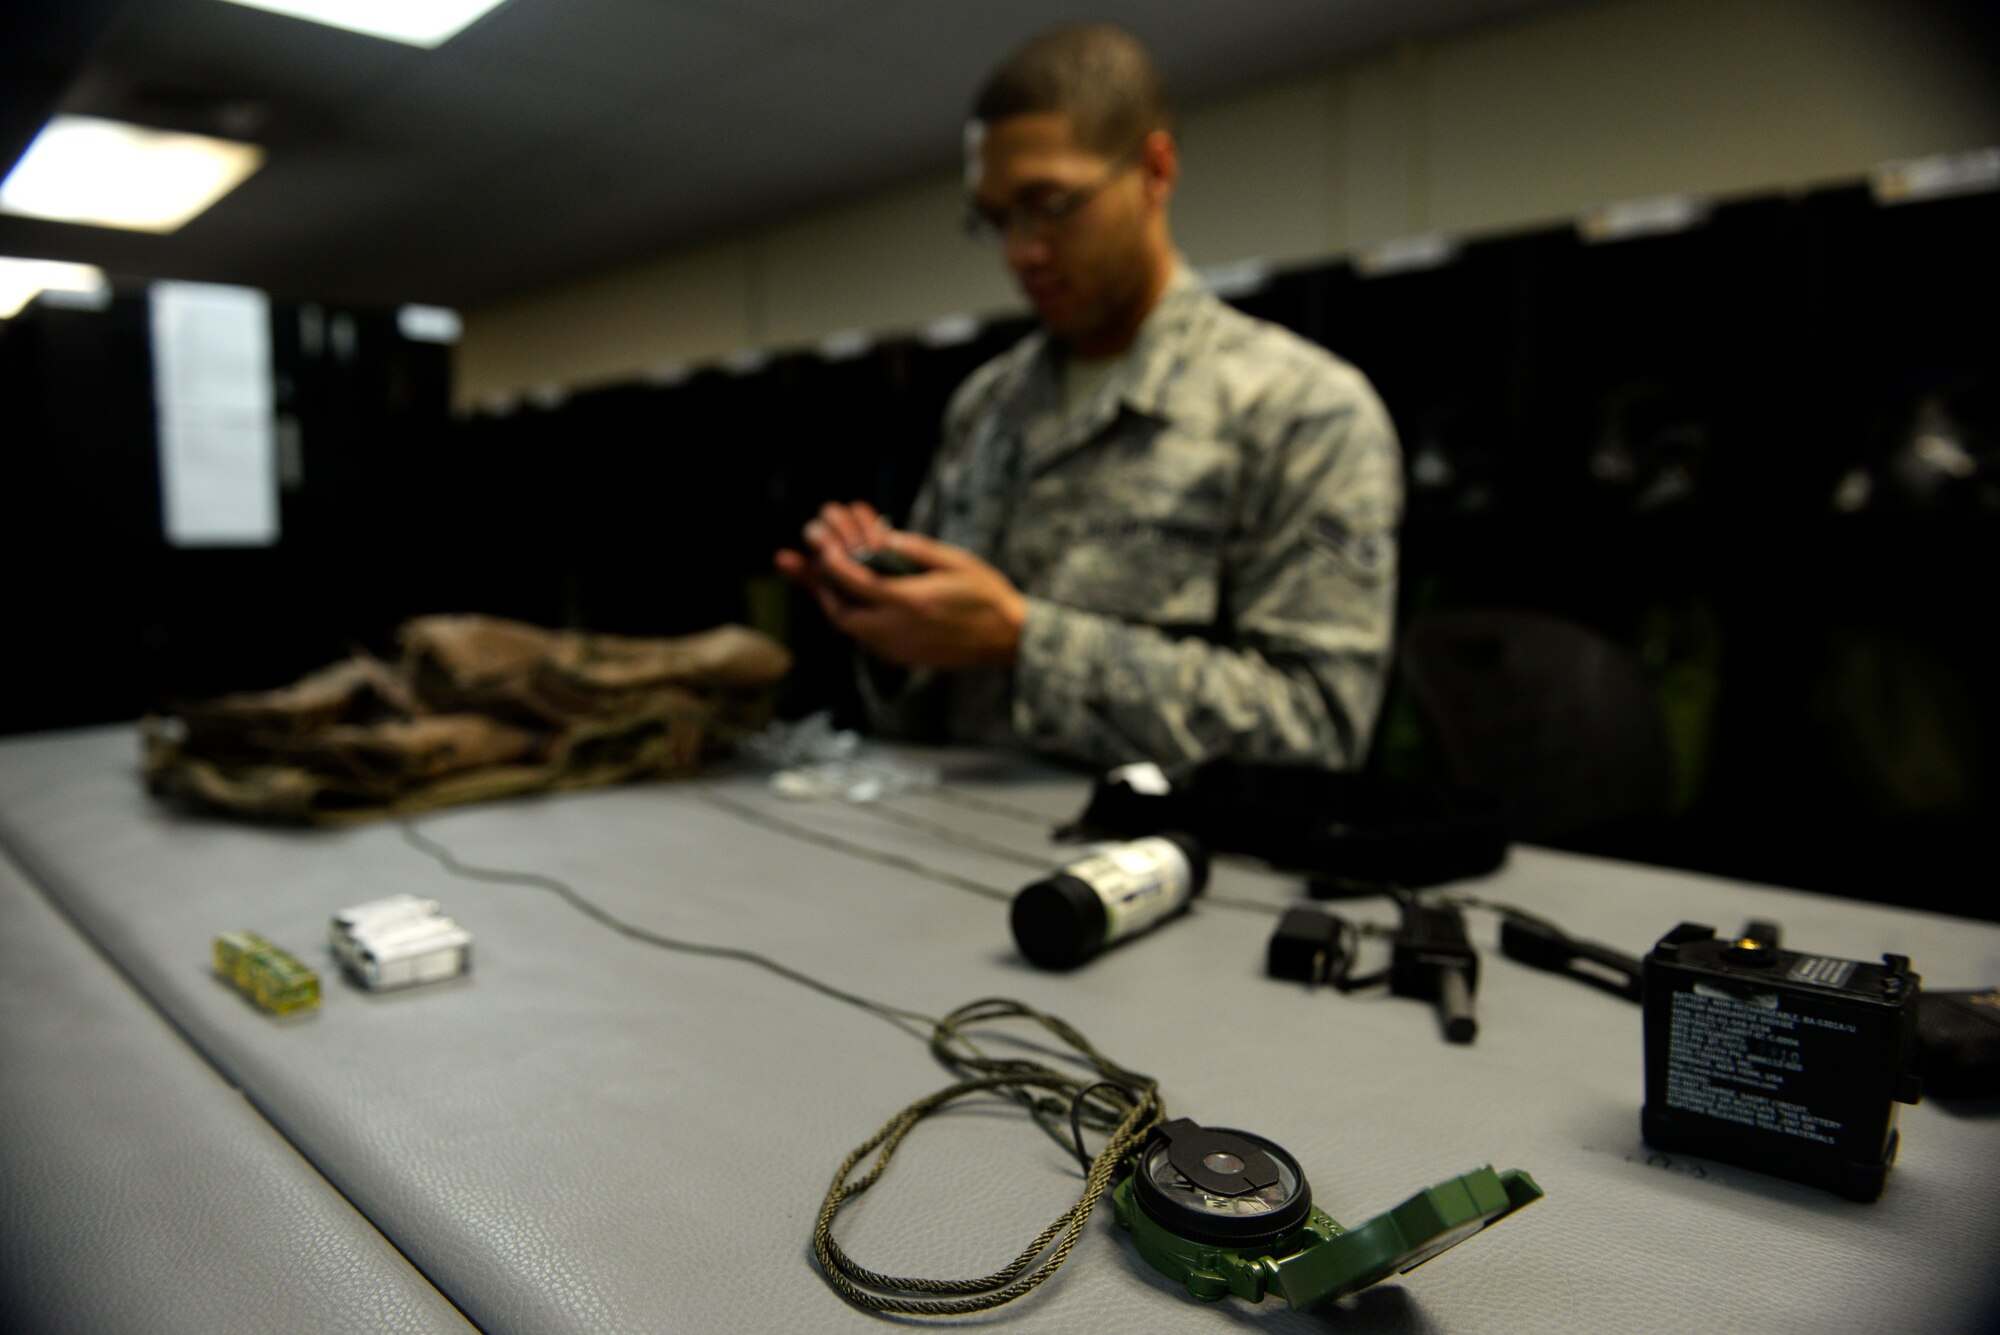 Airman 1st Class Michael Banks, 20th Expeditionary Bomb Squadron aircrew flight equipment specialist, checks a survival vest worn by B-52 Stratofortress pilots Aug. 12, 2015, at Andersen Air Force Base, Guam. Survival vests include infrared beacons, water, compass, medical supplies and other essential tools to help aircrews survive after an emergency landing or ejection. (U.S. Air Force photo by Staff Sgt. Alexander W. Riedel/Released)